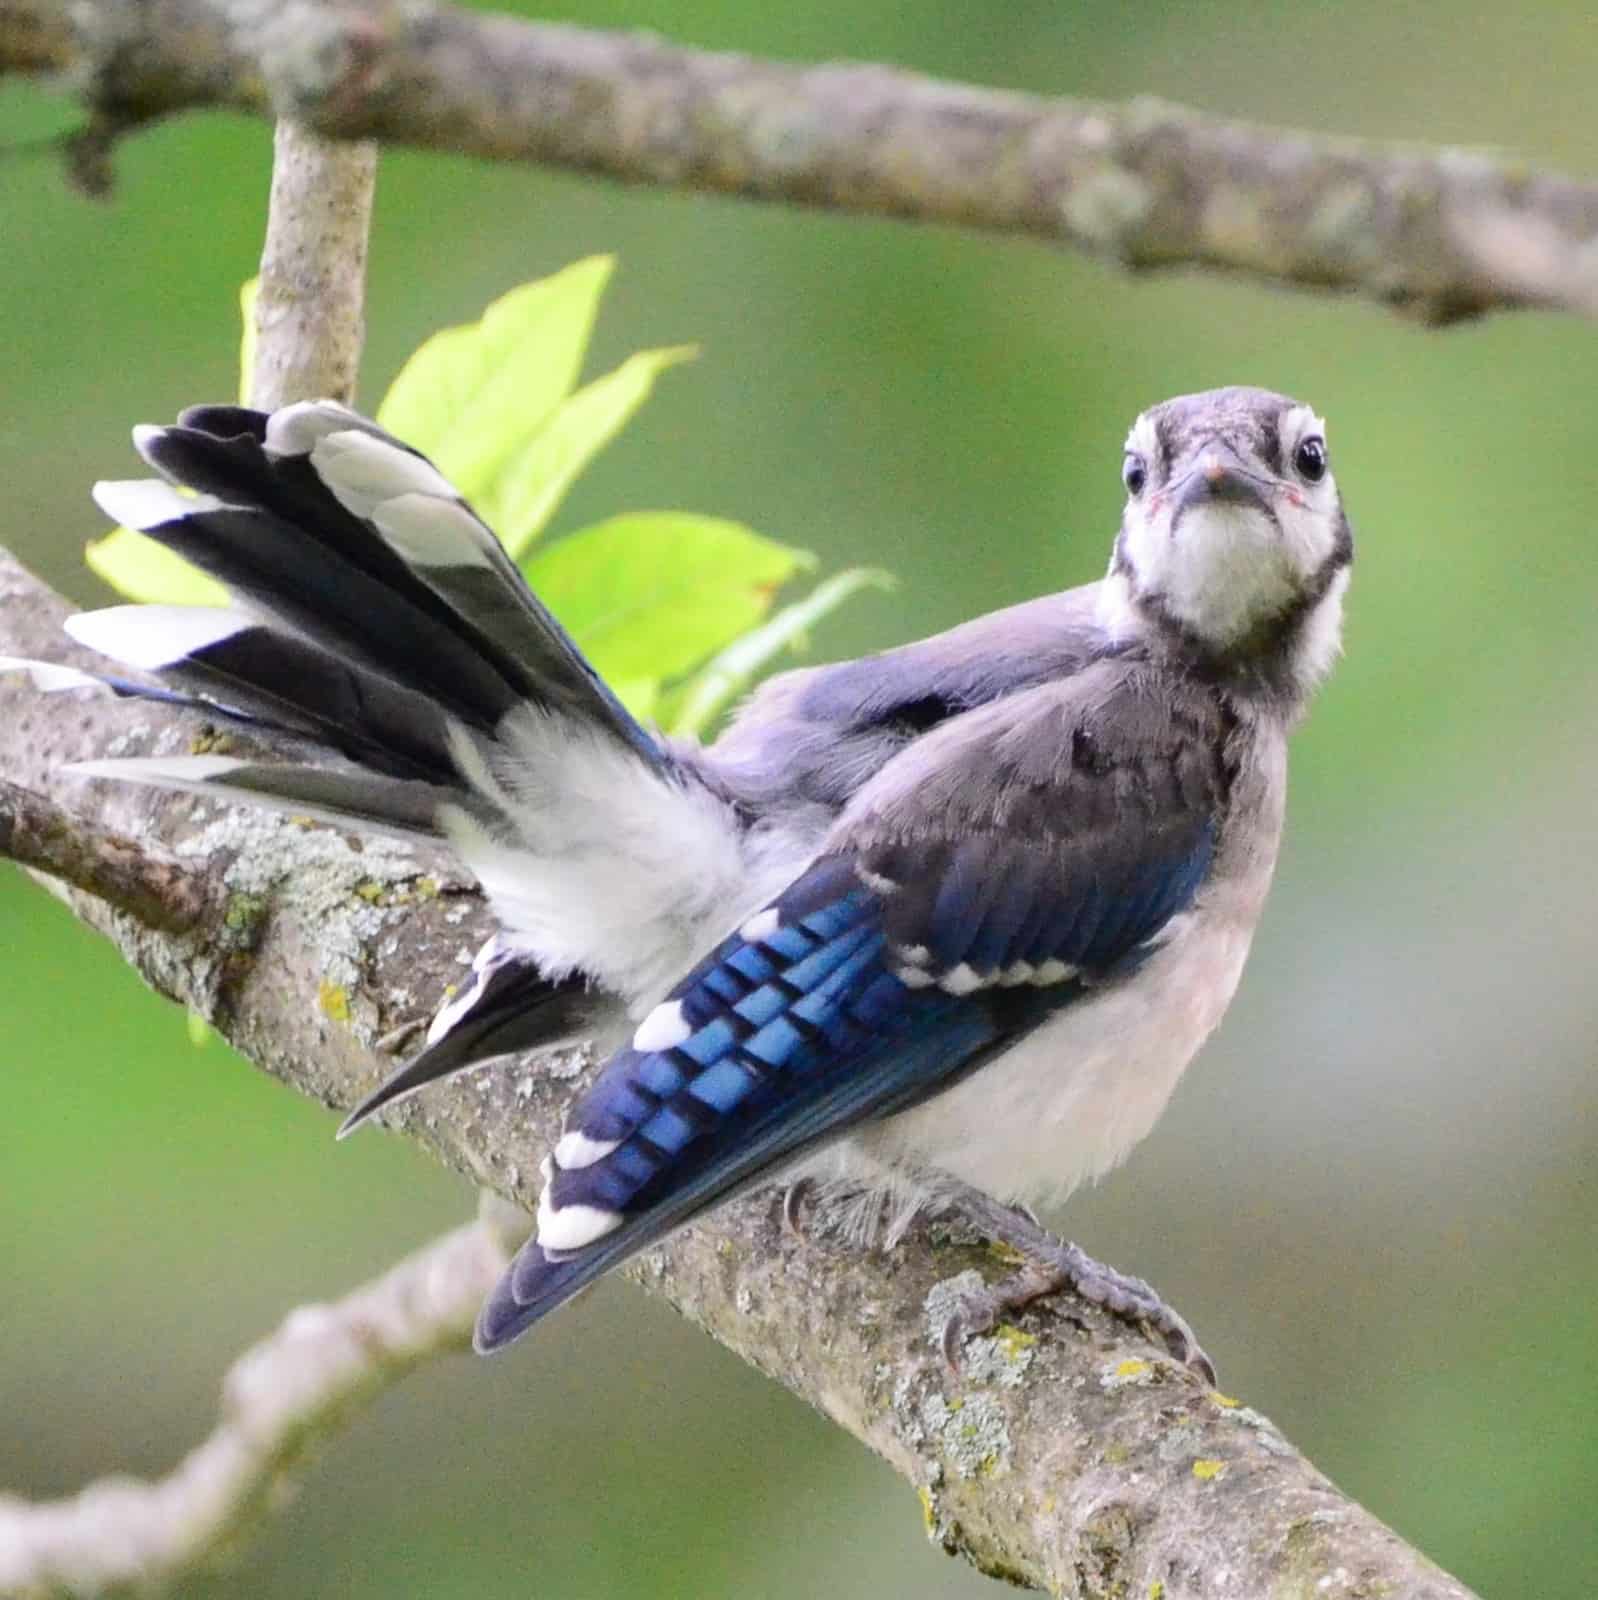 An eastern blue bird looks at the camera, perched on a branch.